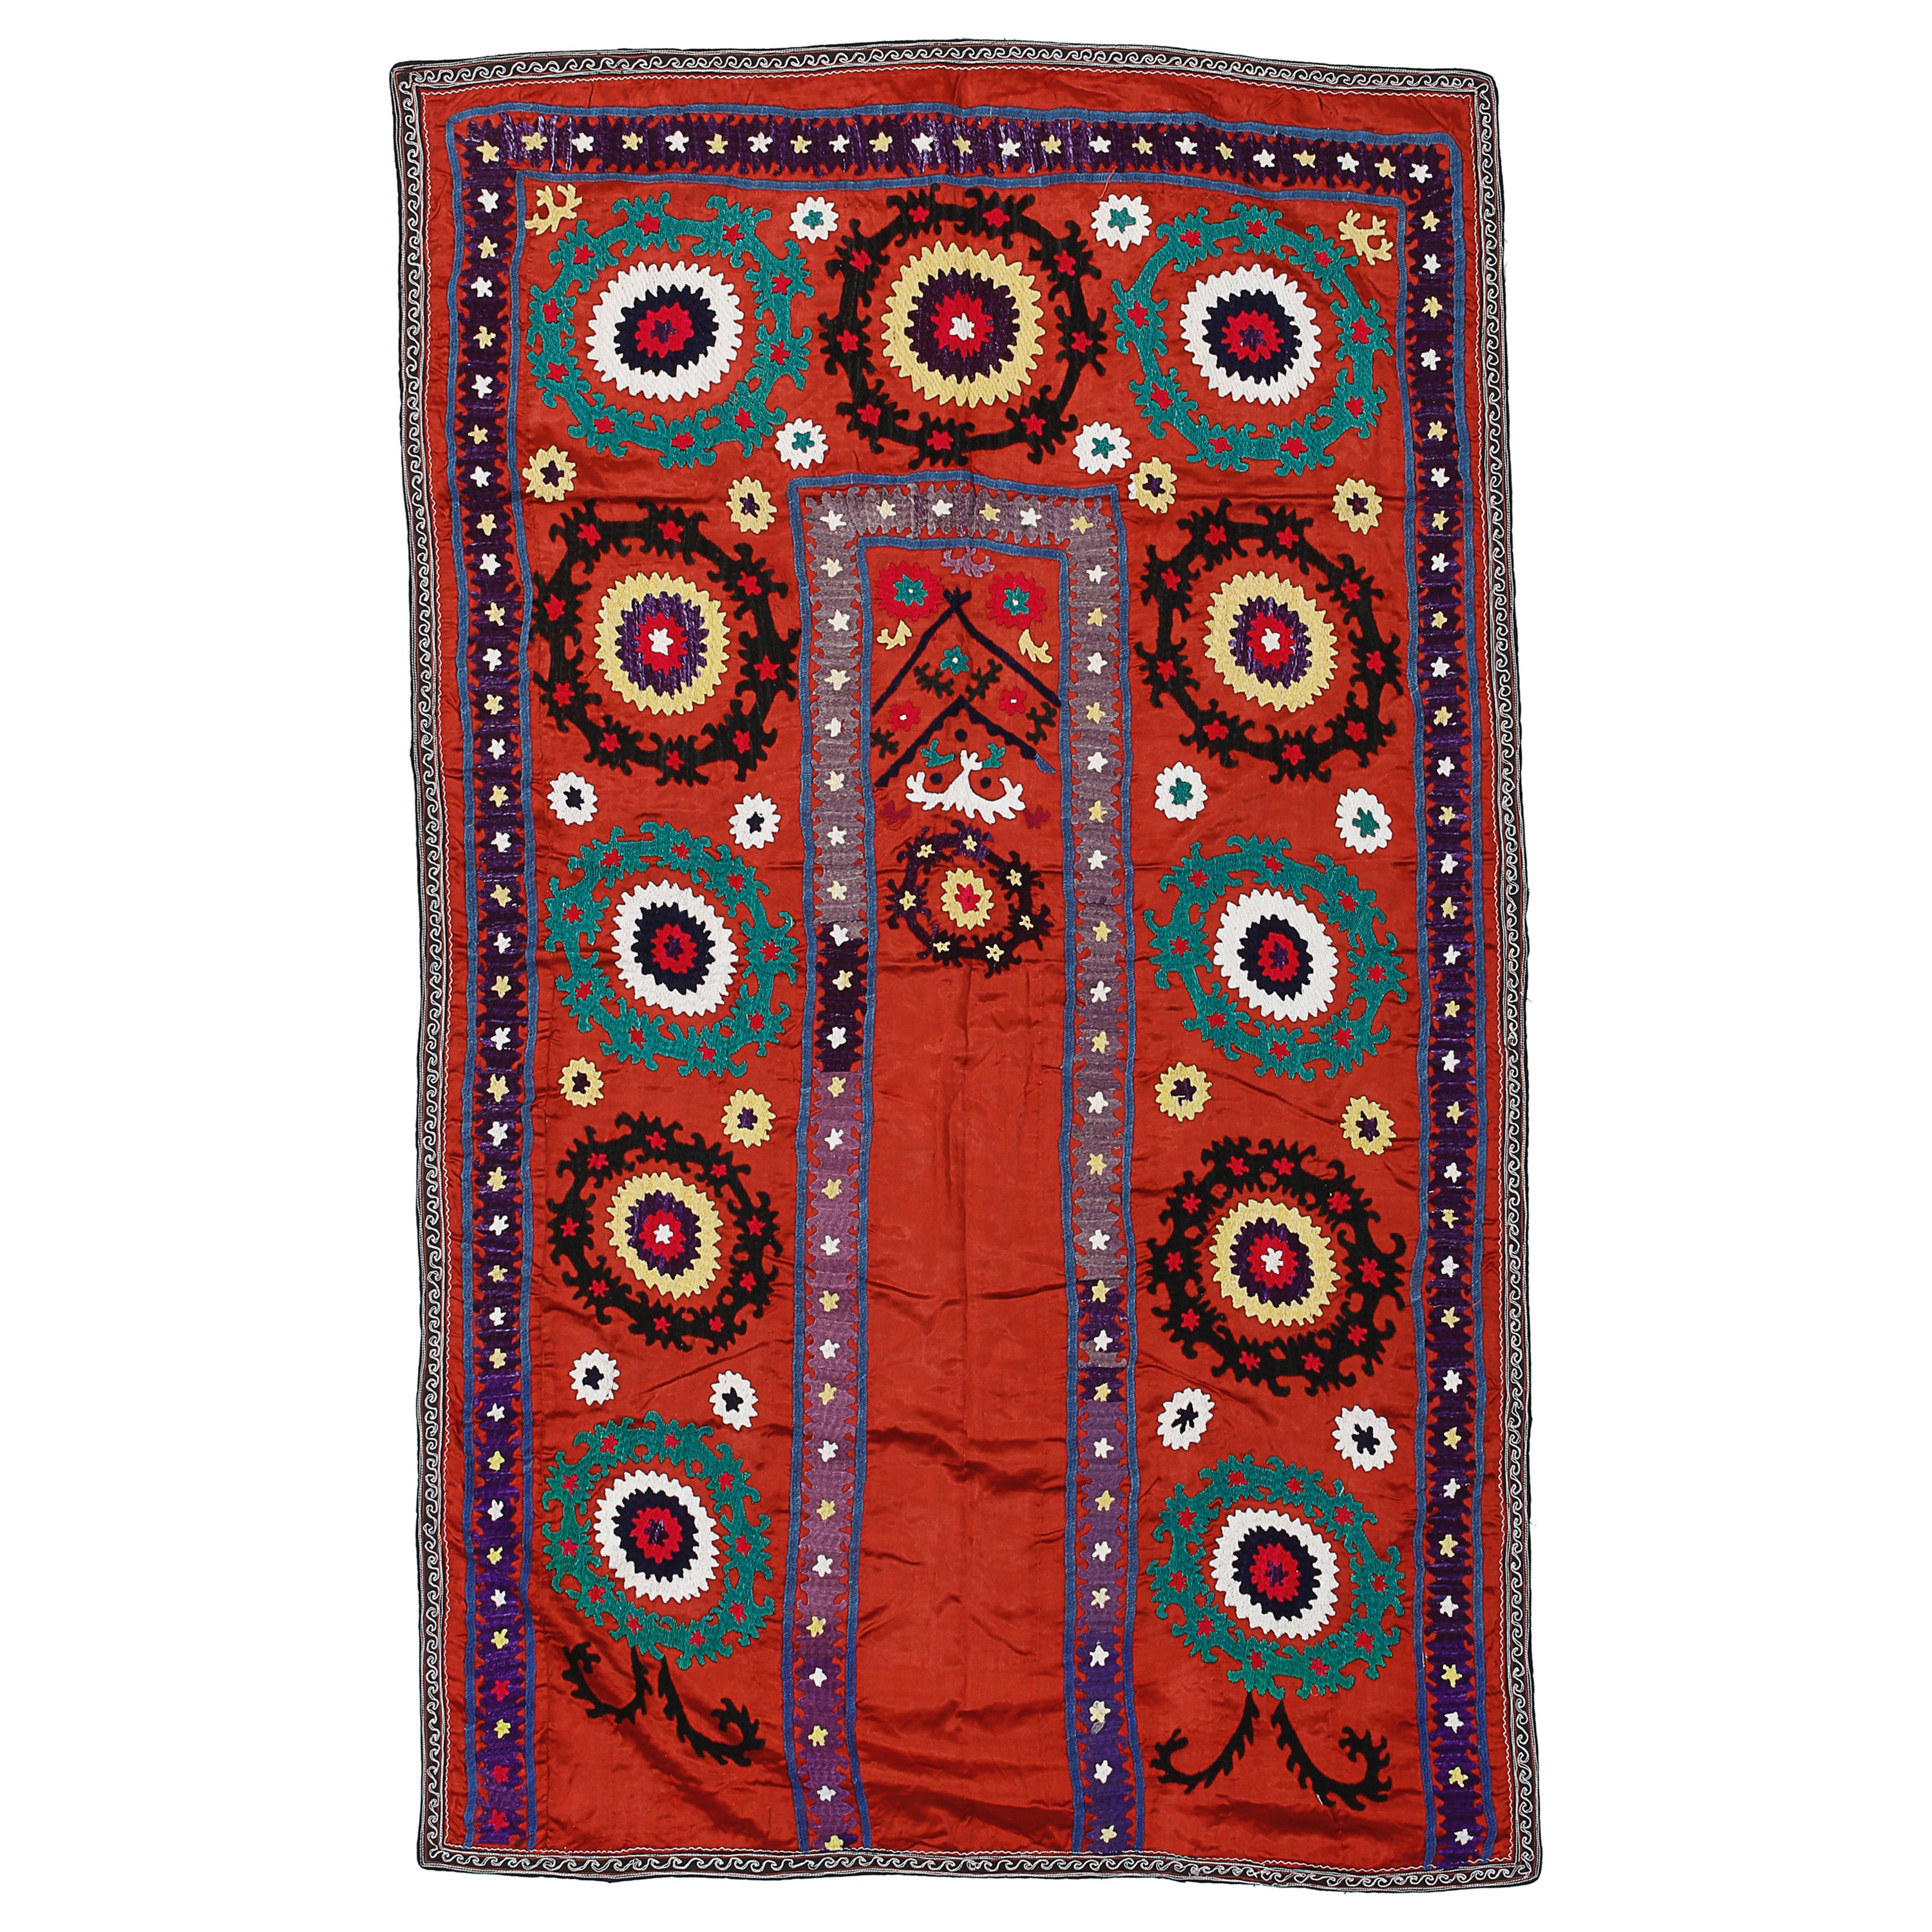 3.2x5.3 Ft Tashkent Suzani Textile Wall Hanging, Red Silk Embroidery Table Cover en vente